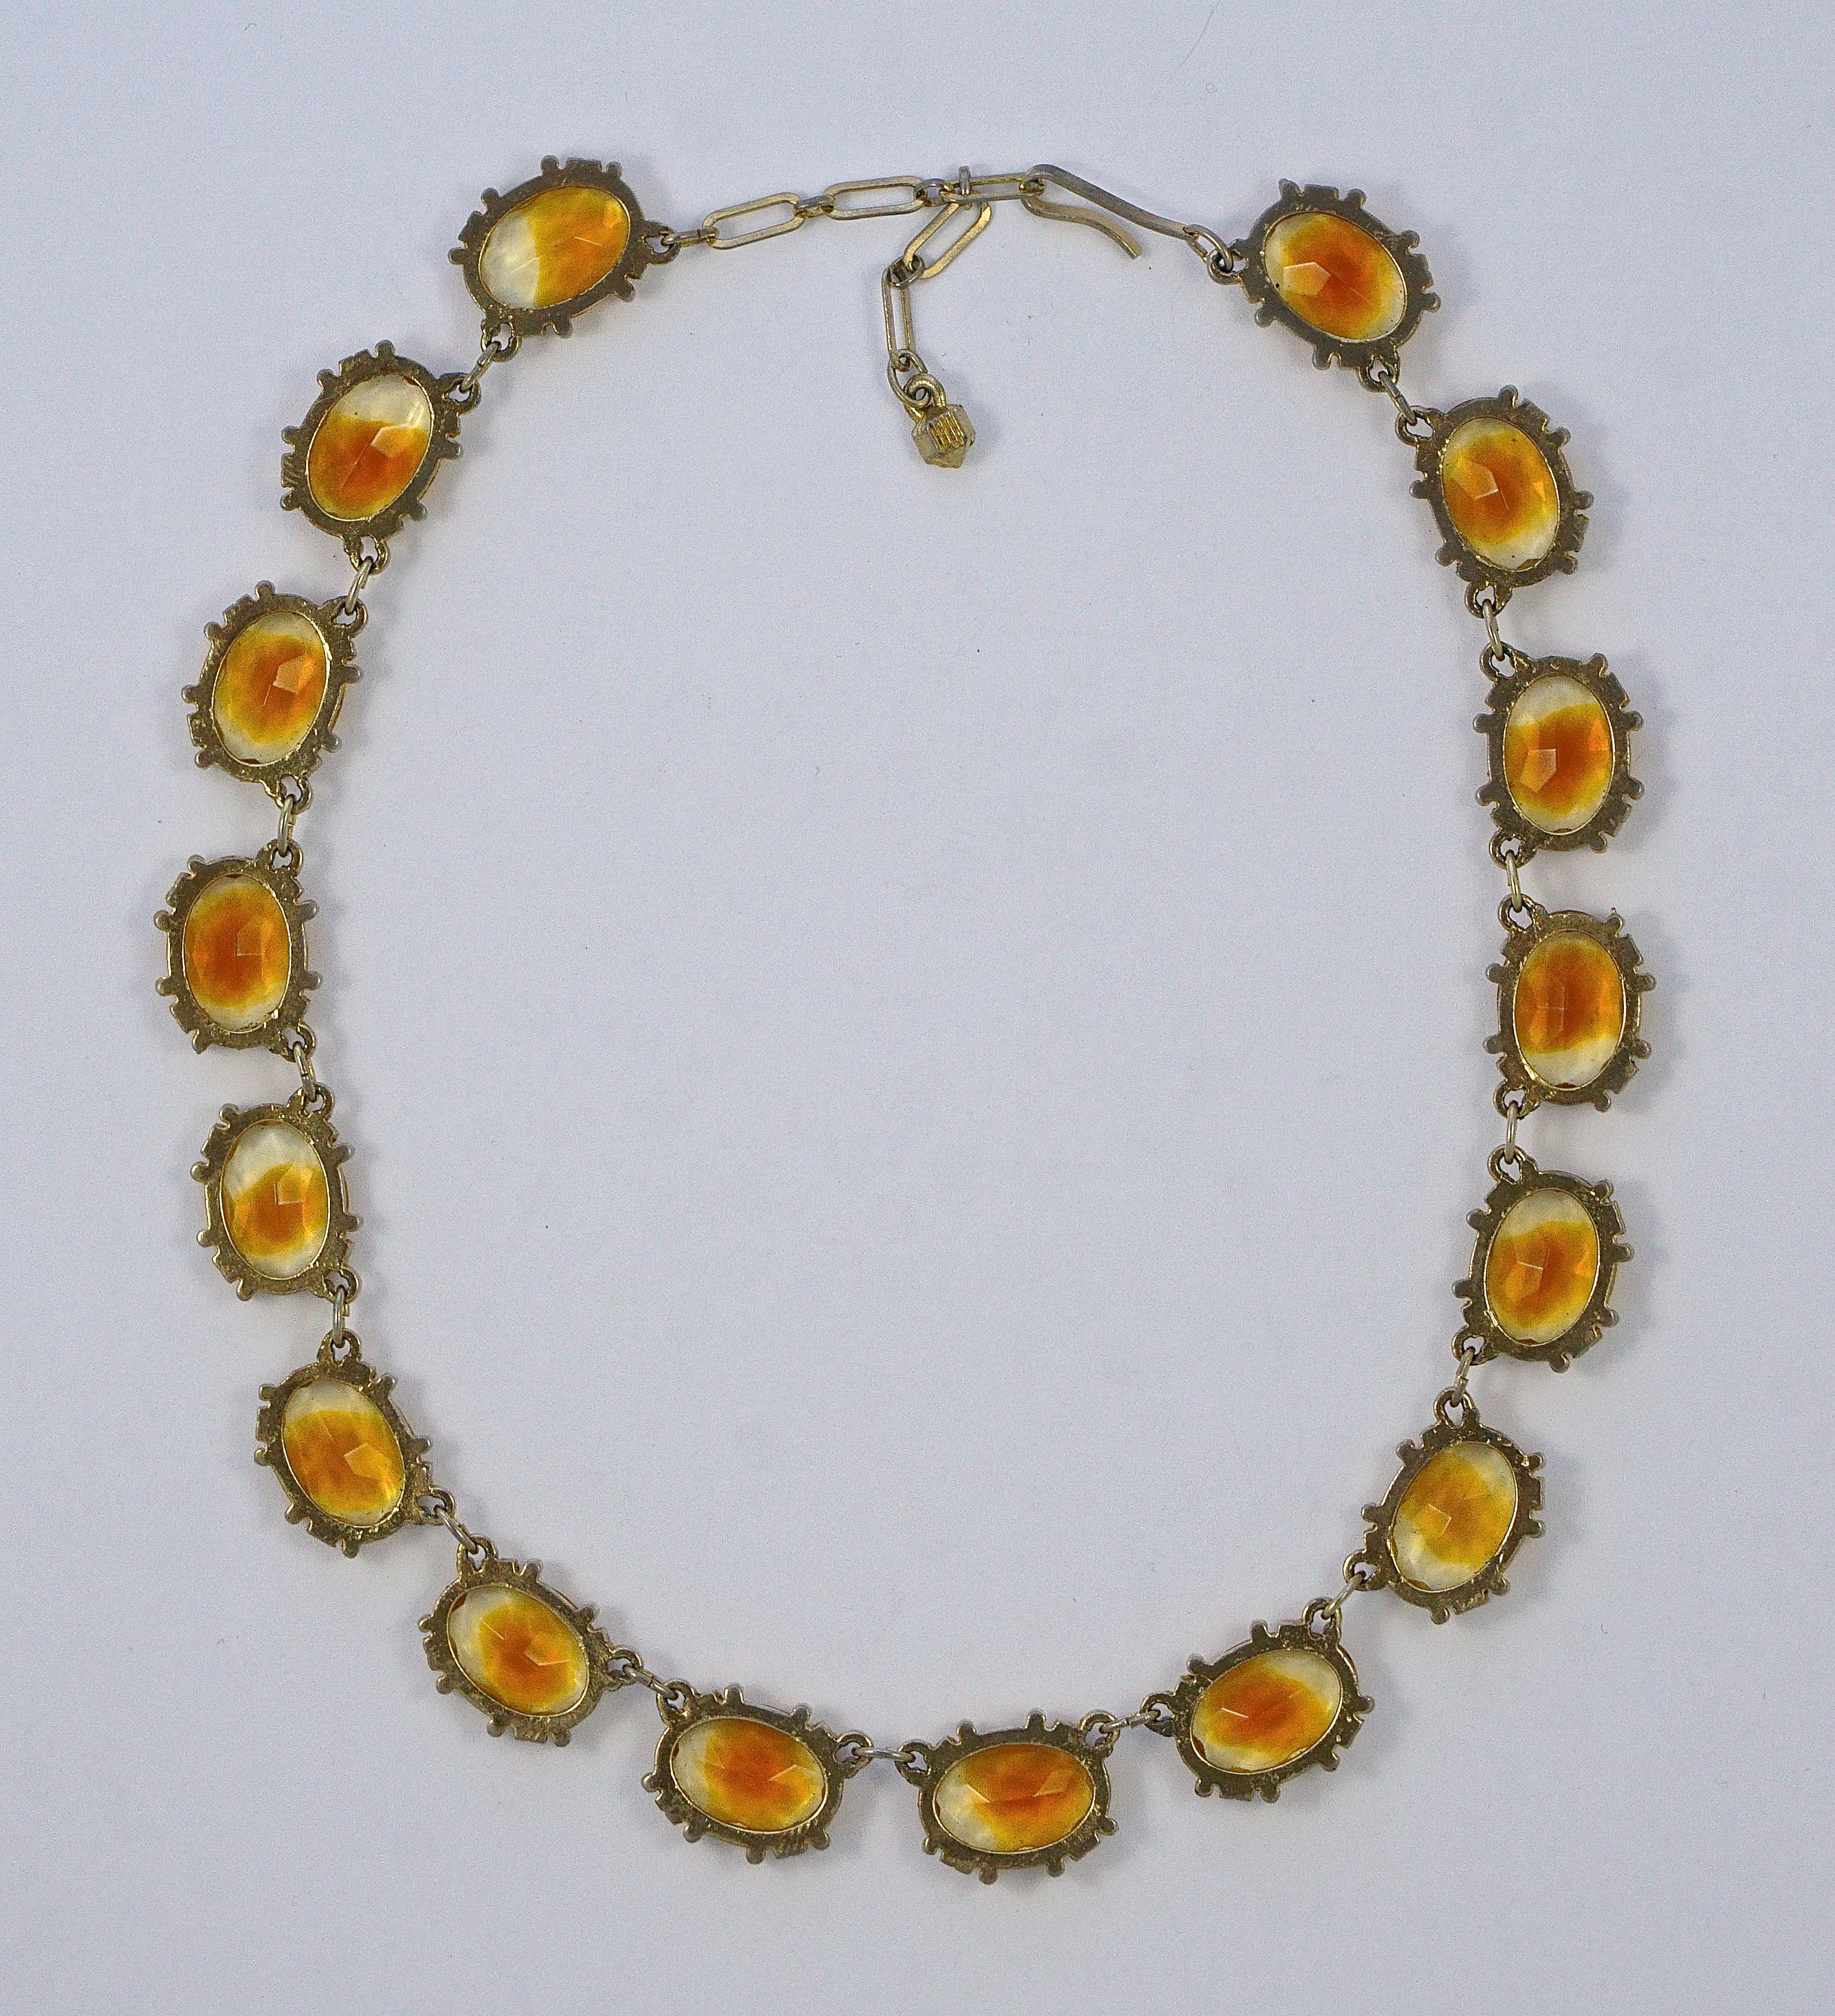 Wonderful gold plated rivière necklace set with oval amber and clear glass stones, they are faceted and open back to catch the light.  Measuring length 39.9cm / 15.7 inches by width 1.3cm / .5 inch, with an extension of 4.6cm / 1.8 inches. The